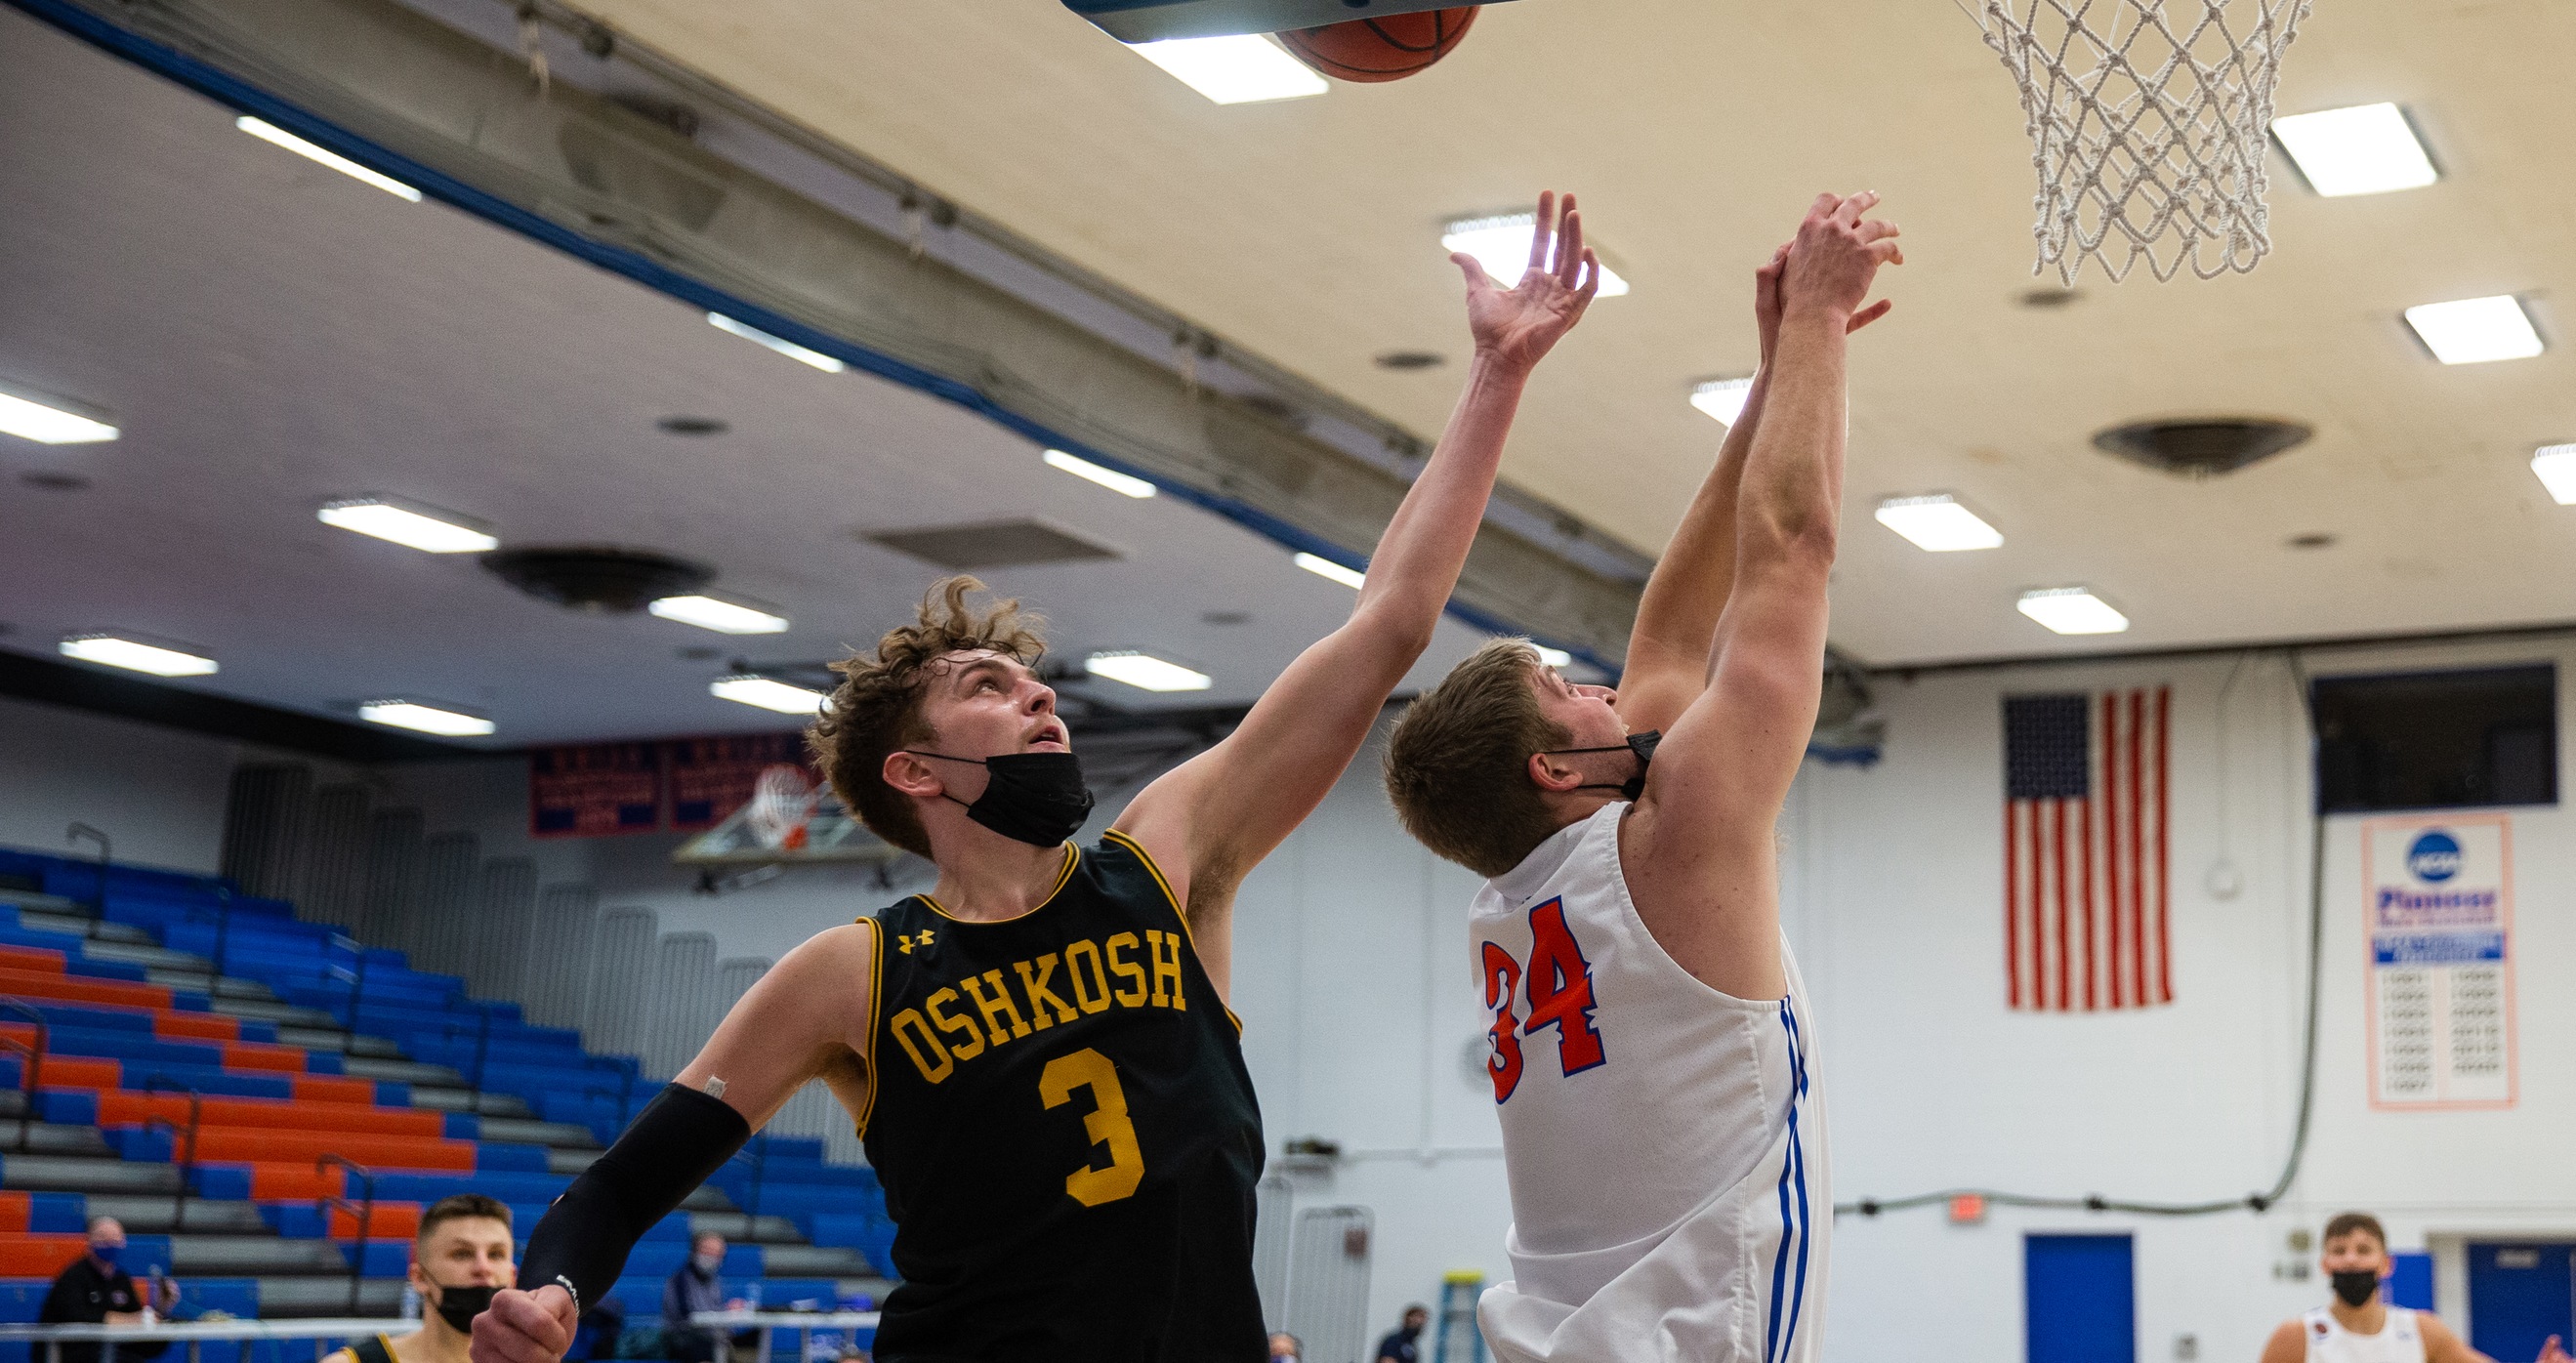 UW-Oshkosh's Eddie Muench led all players with a career-high 27 points, including seven 3-point baskets.